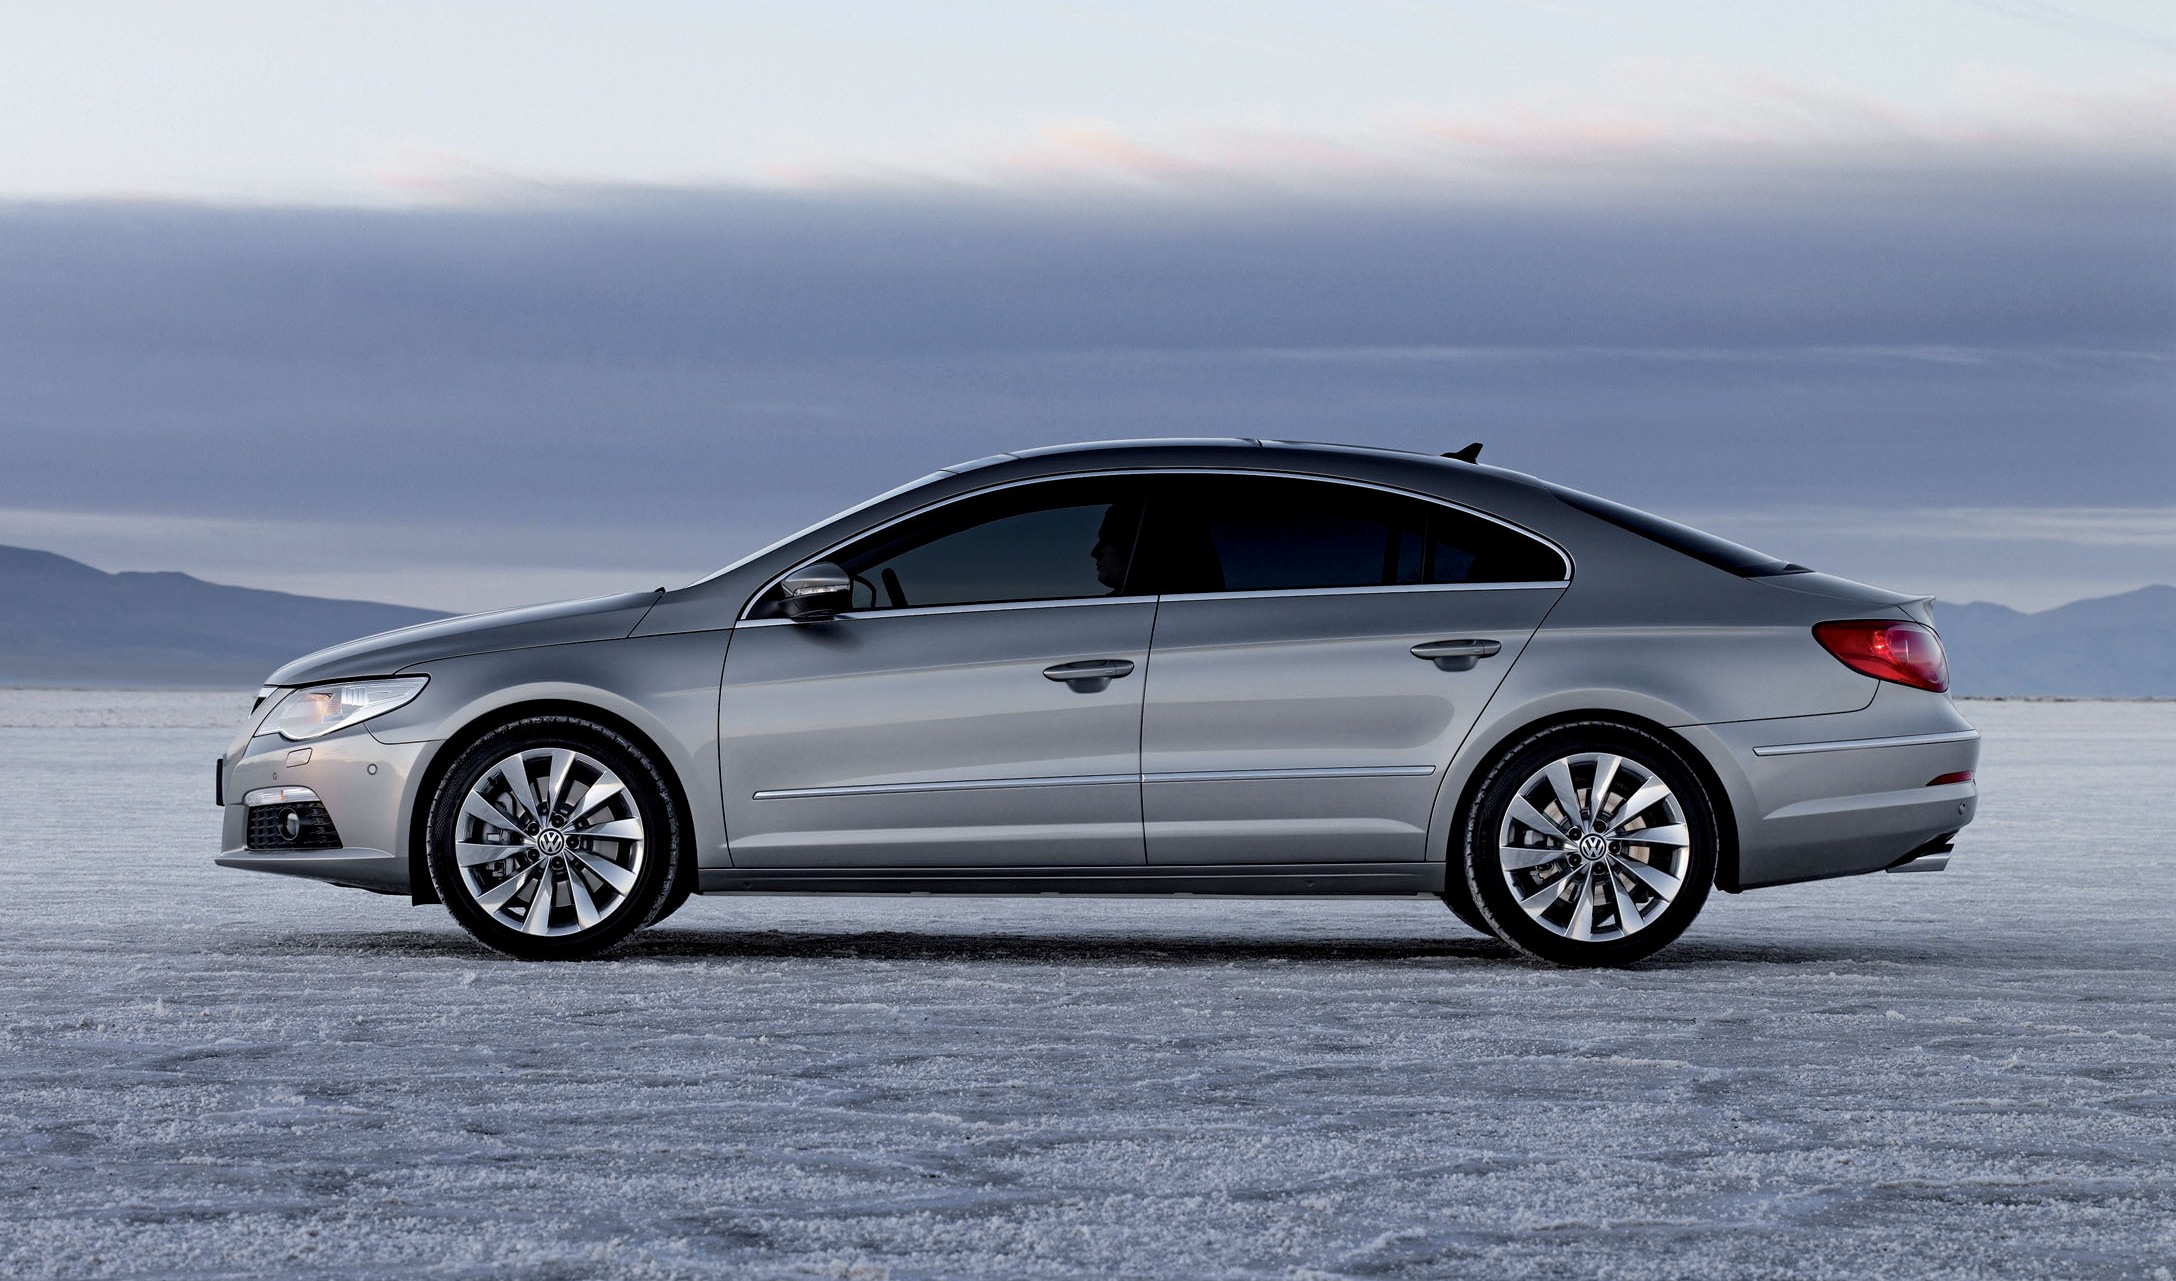 volkswagen, cars, side view, silver, silvery, 2009 volkswagen cc images